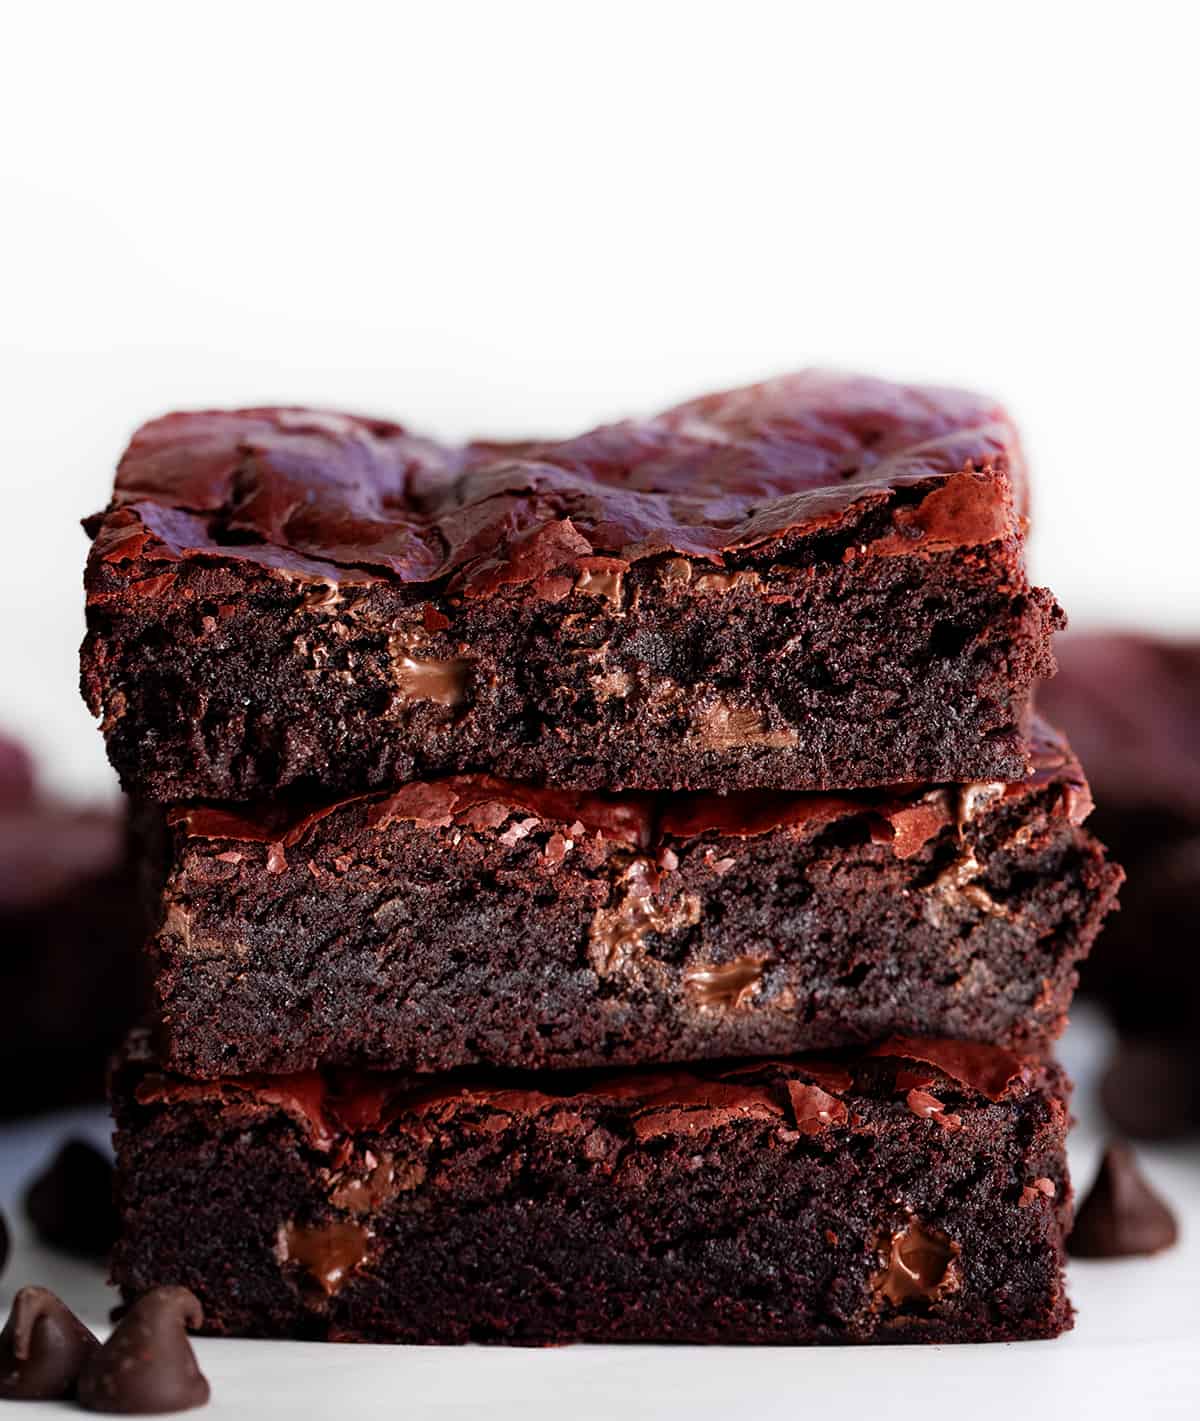 Stack of Red Velvet Brownies showing the chewy texture inside.